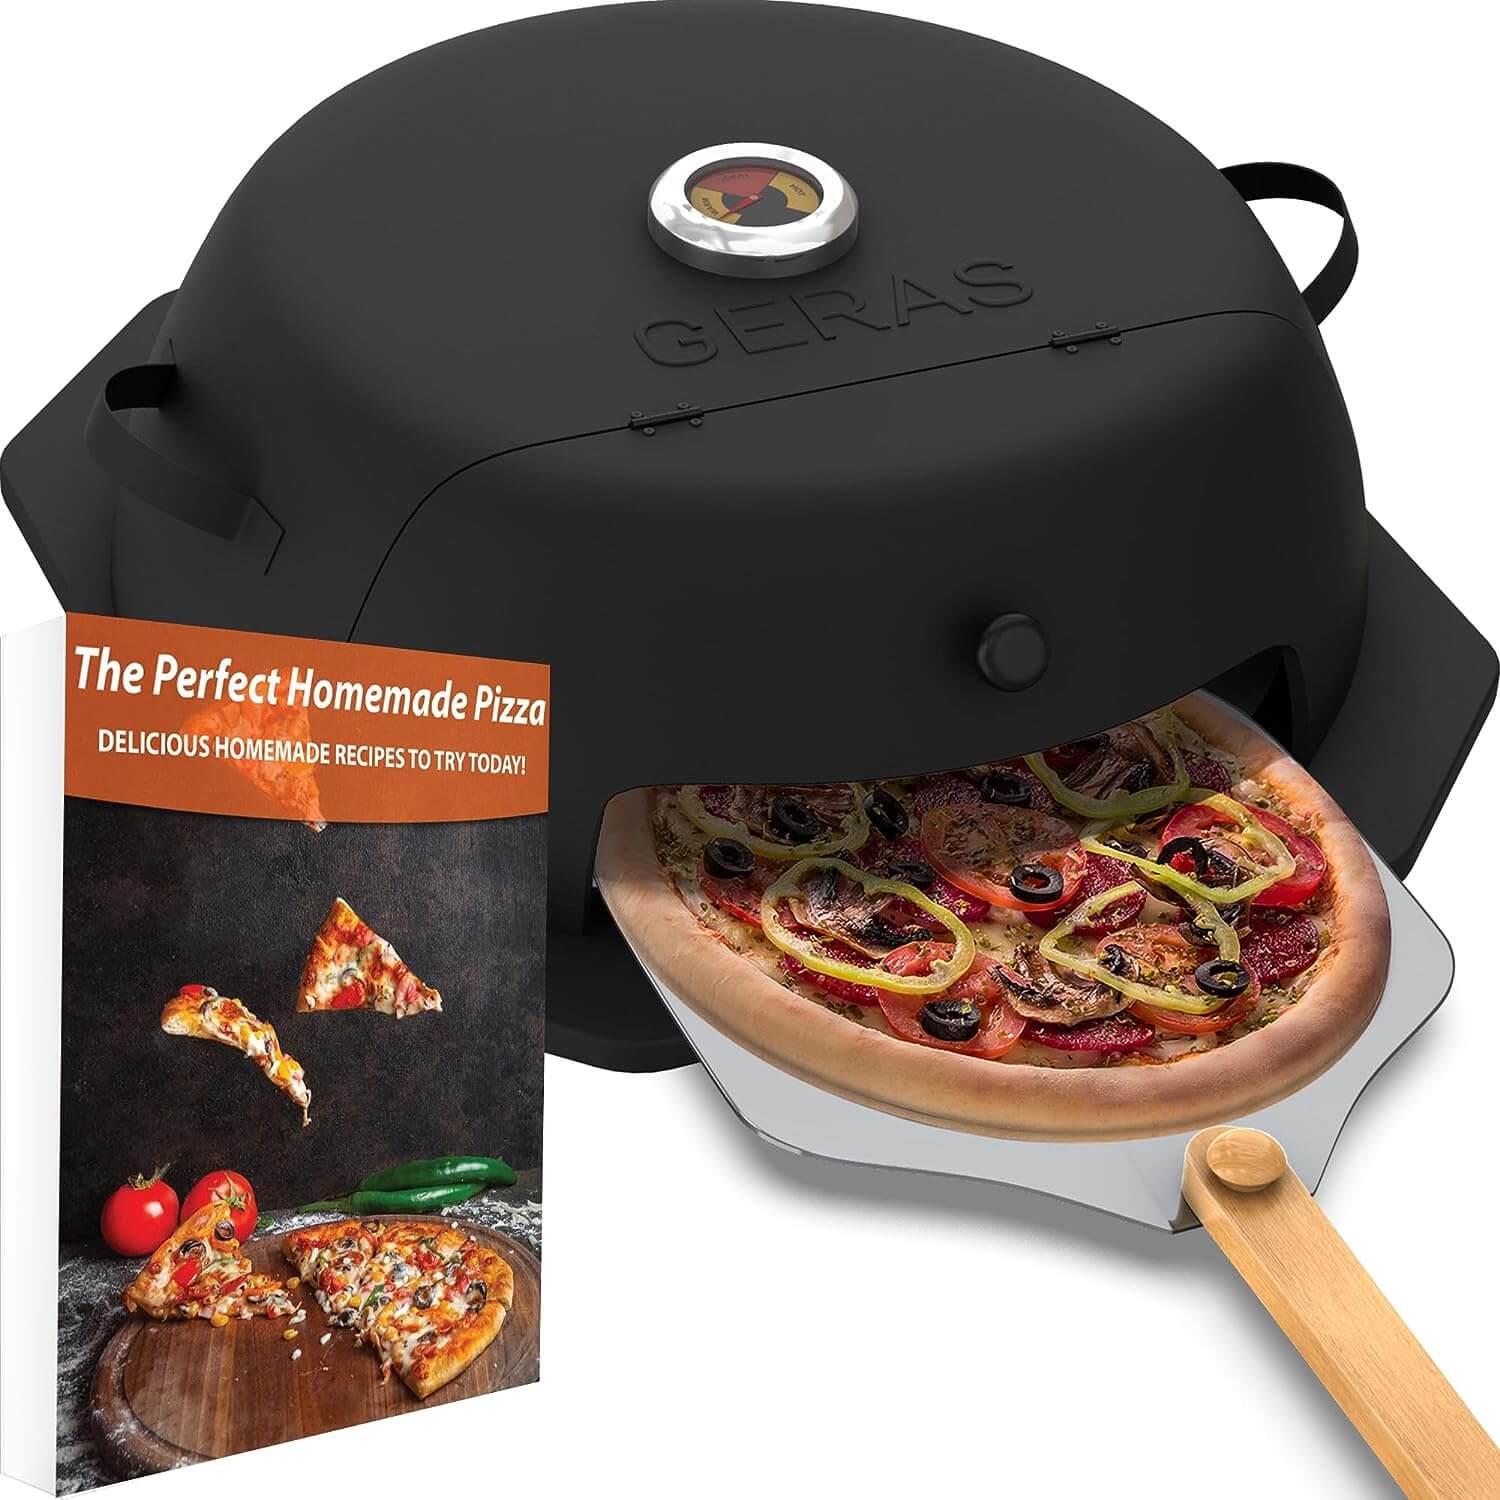 Geras Grill Top Pizza Oven With Pizza Stone and Pizza Peel – Geras Club